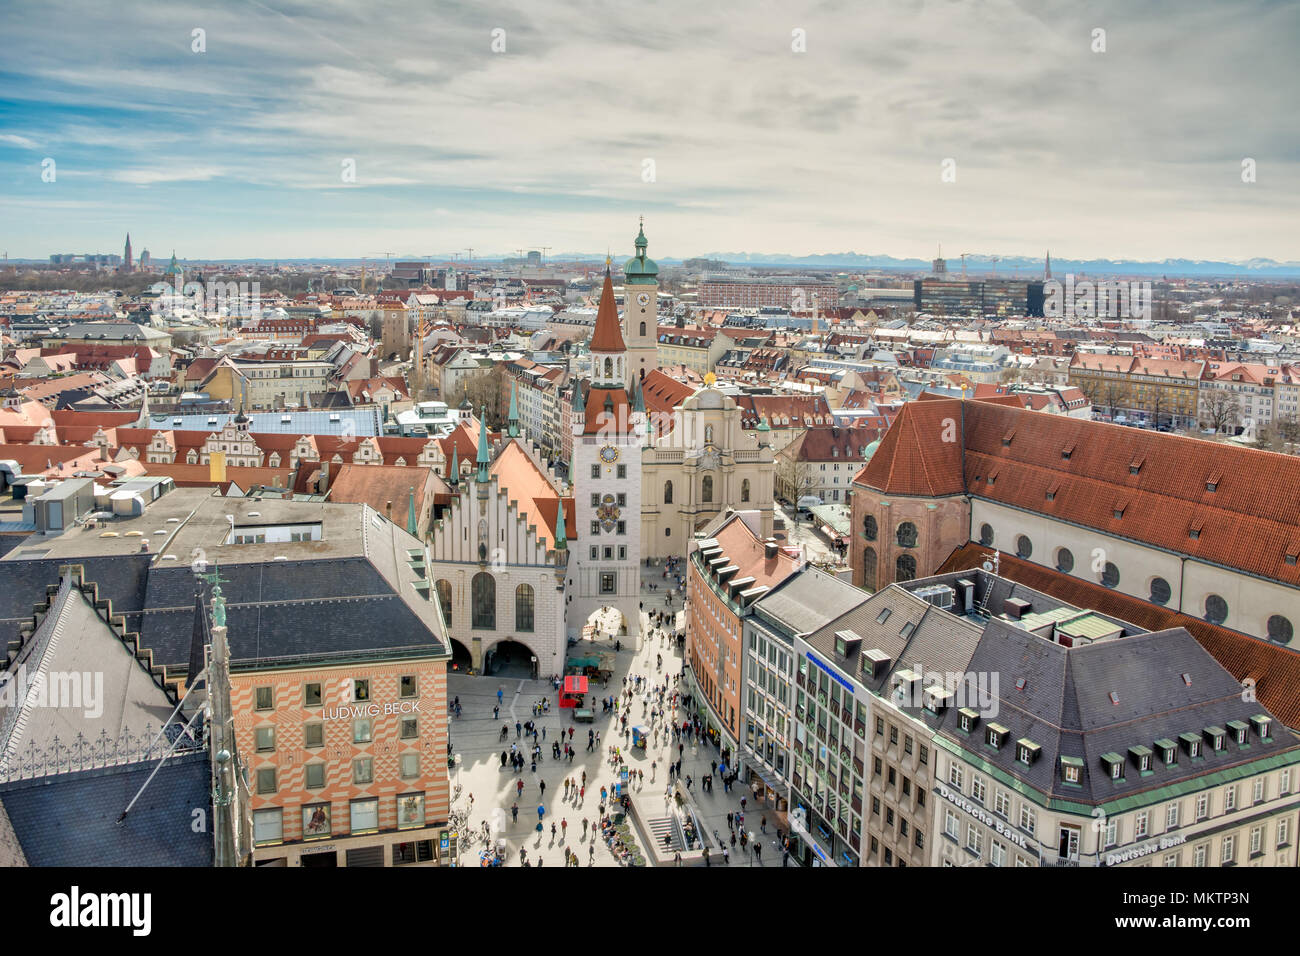 MUNICH, GERMANY - APRIL 4: Aerial view over the city of Munich, Germany on April 4, 2018. Crowds of people are at the square. Stock Photo